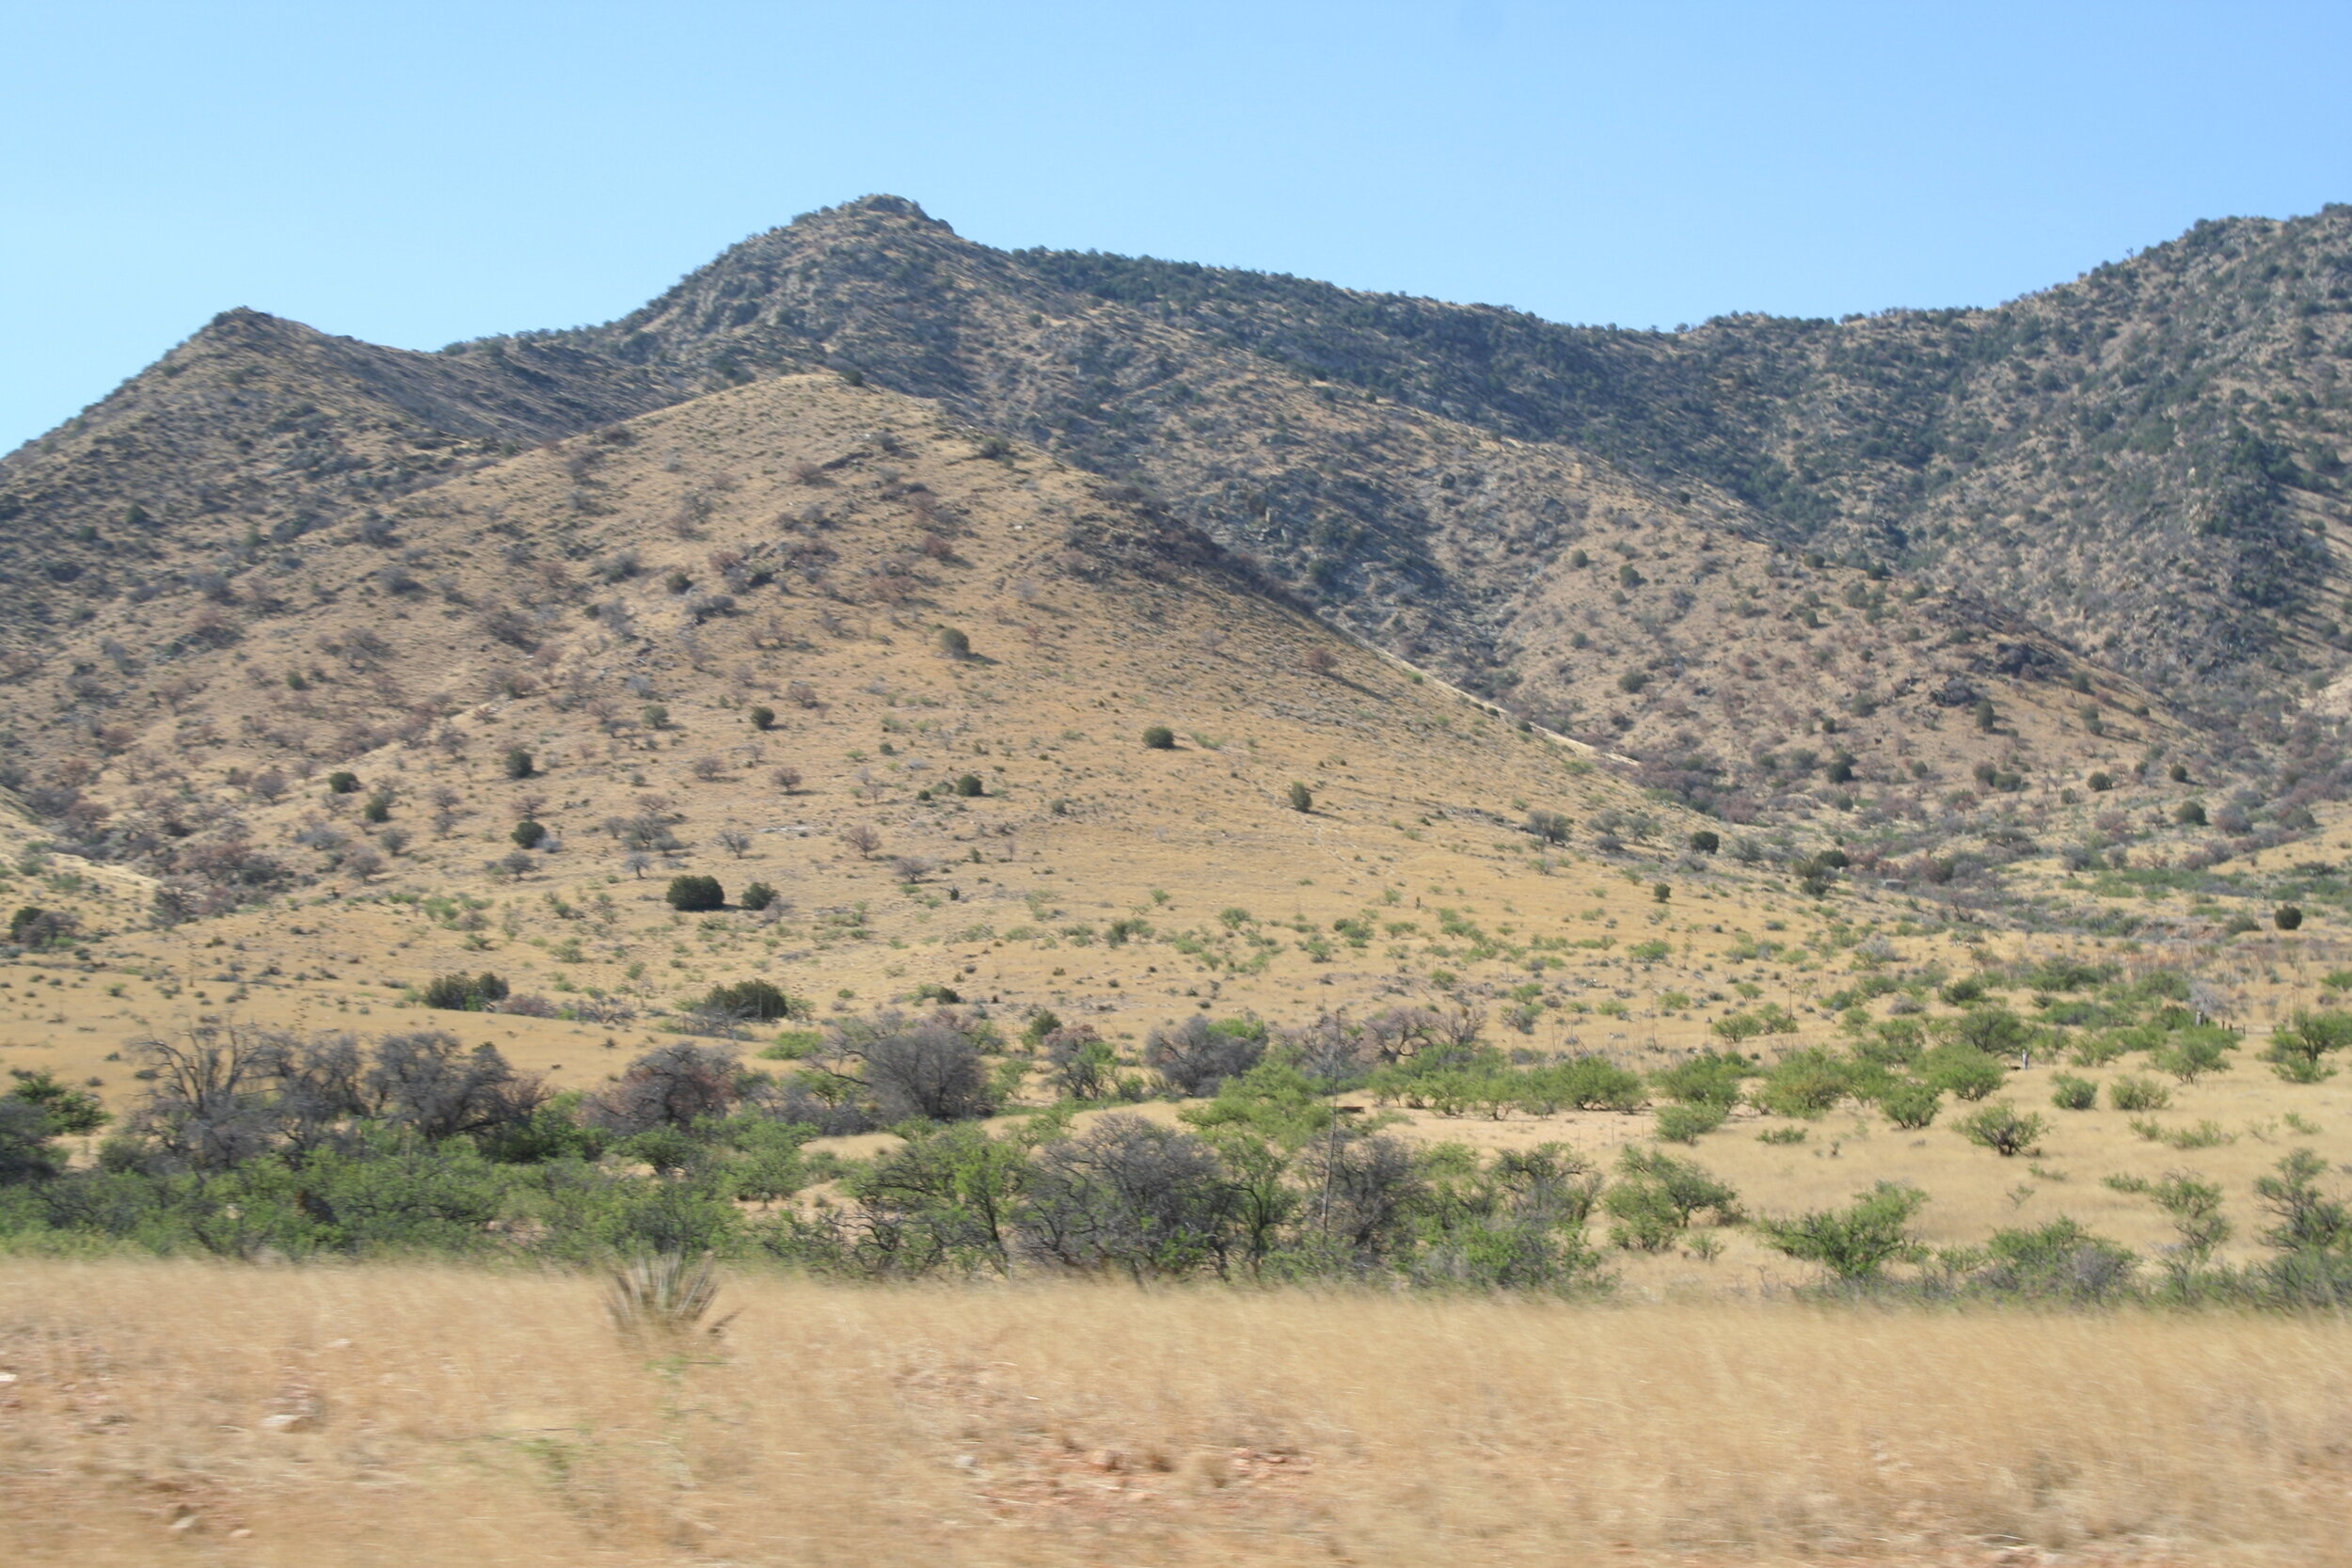   A view along the trail north of Cochise Stronghold.  